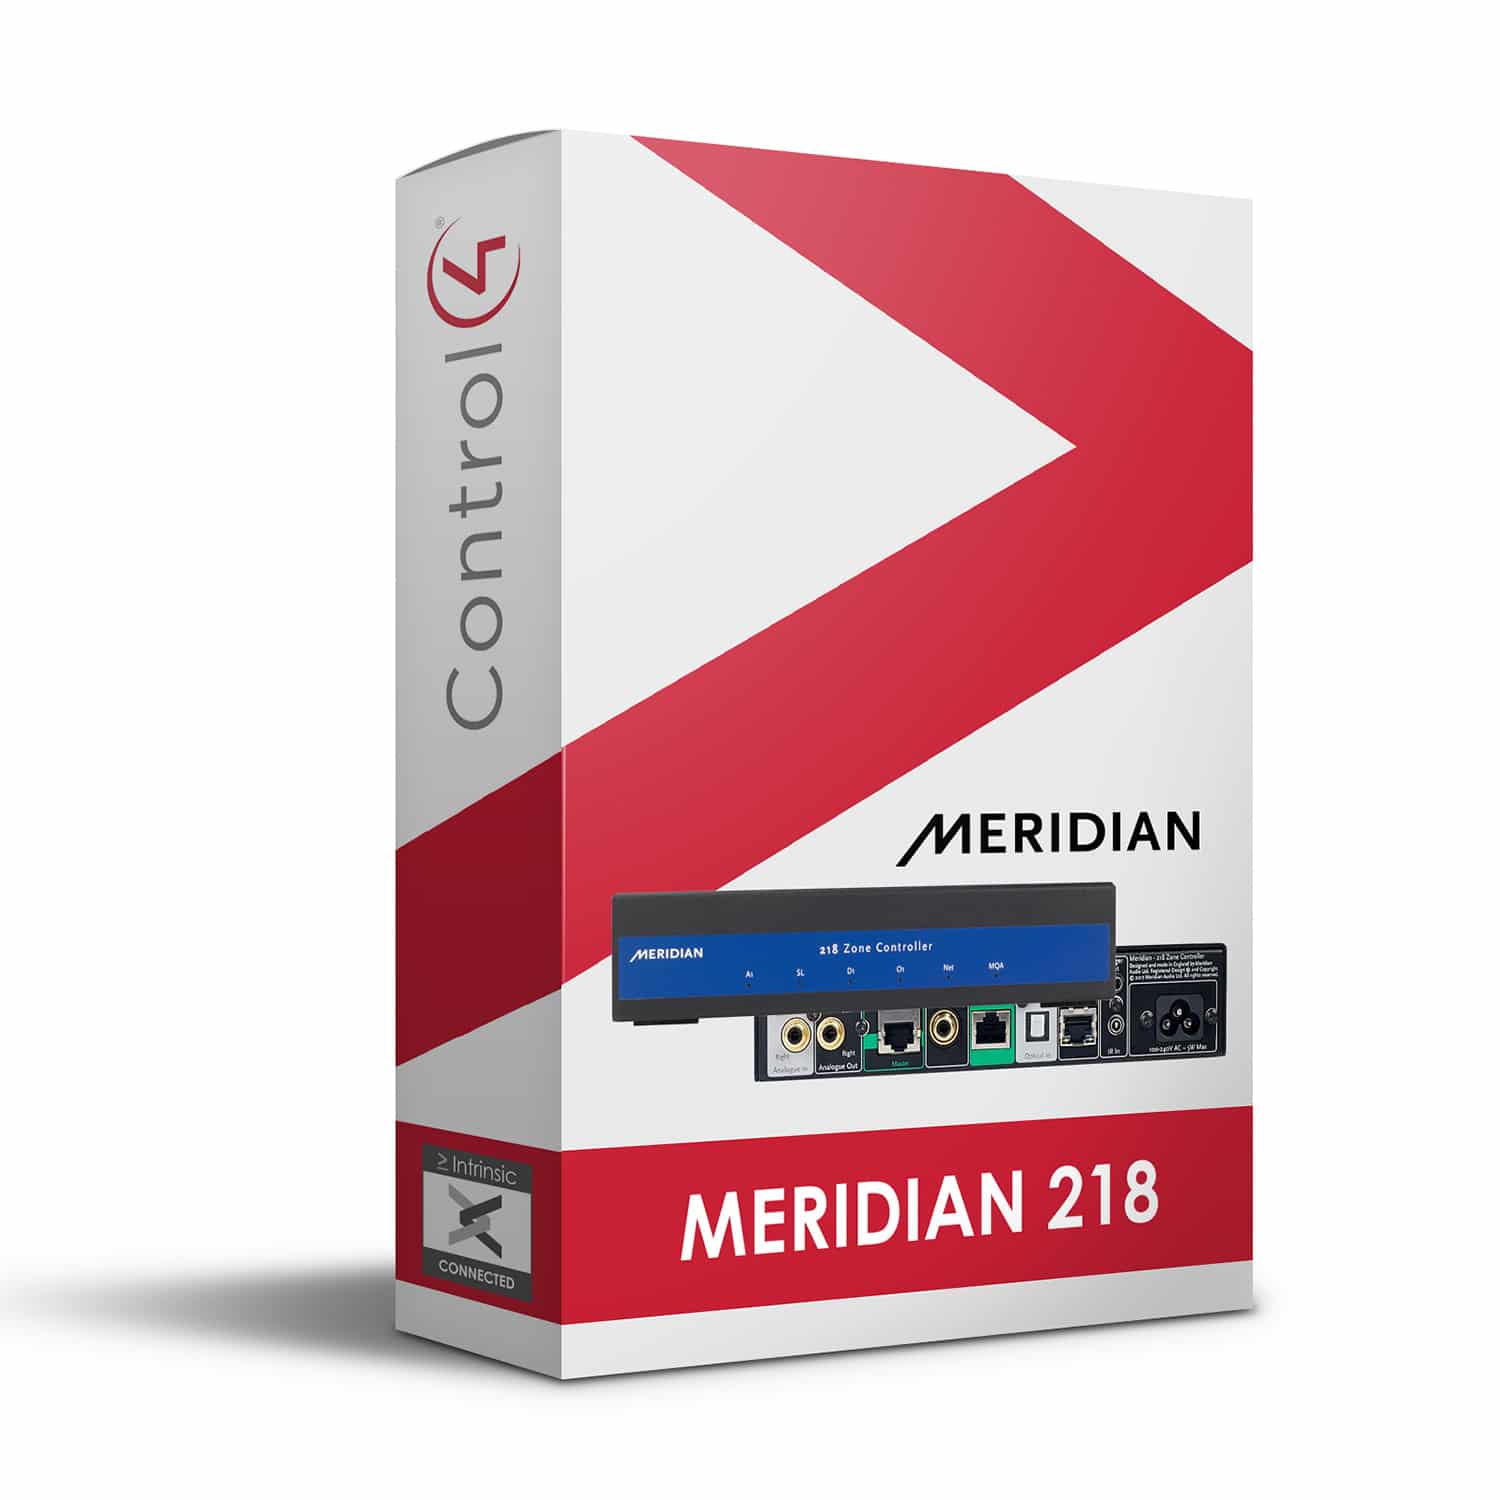 Meridian 218 IP Driver for Control4